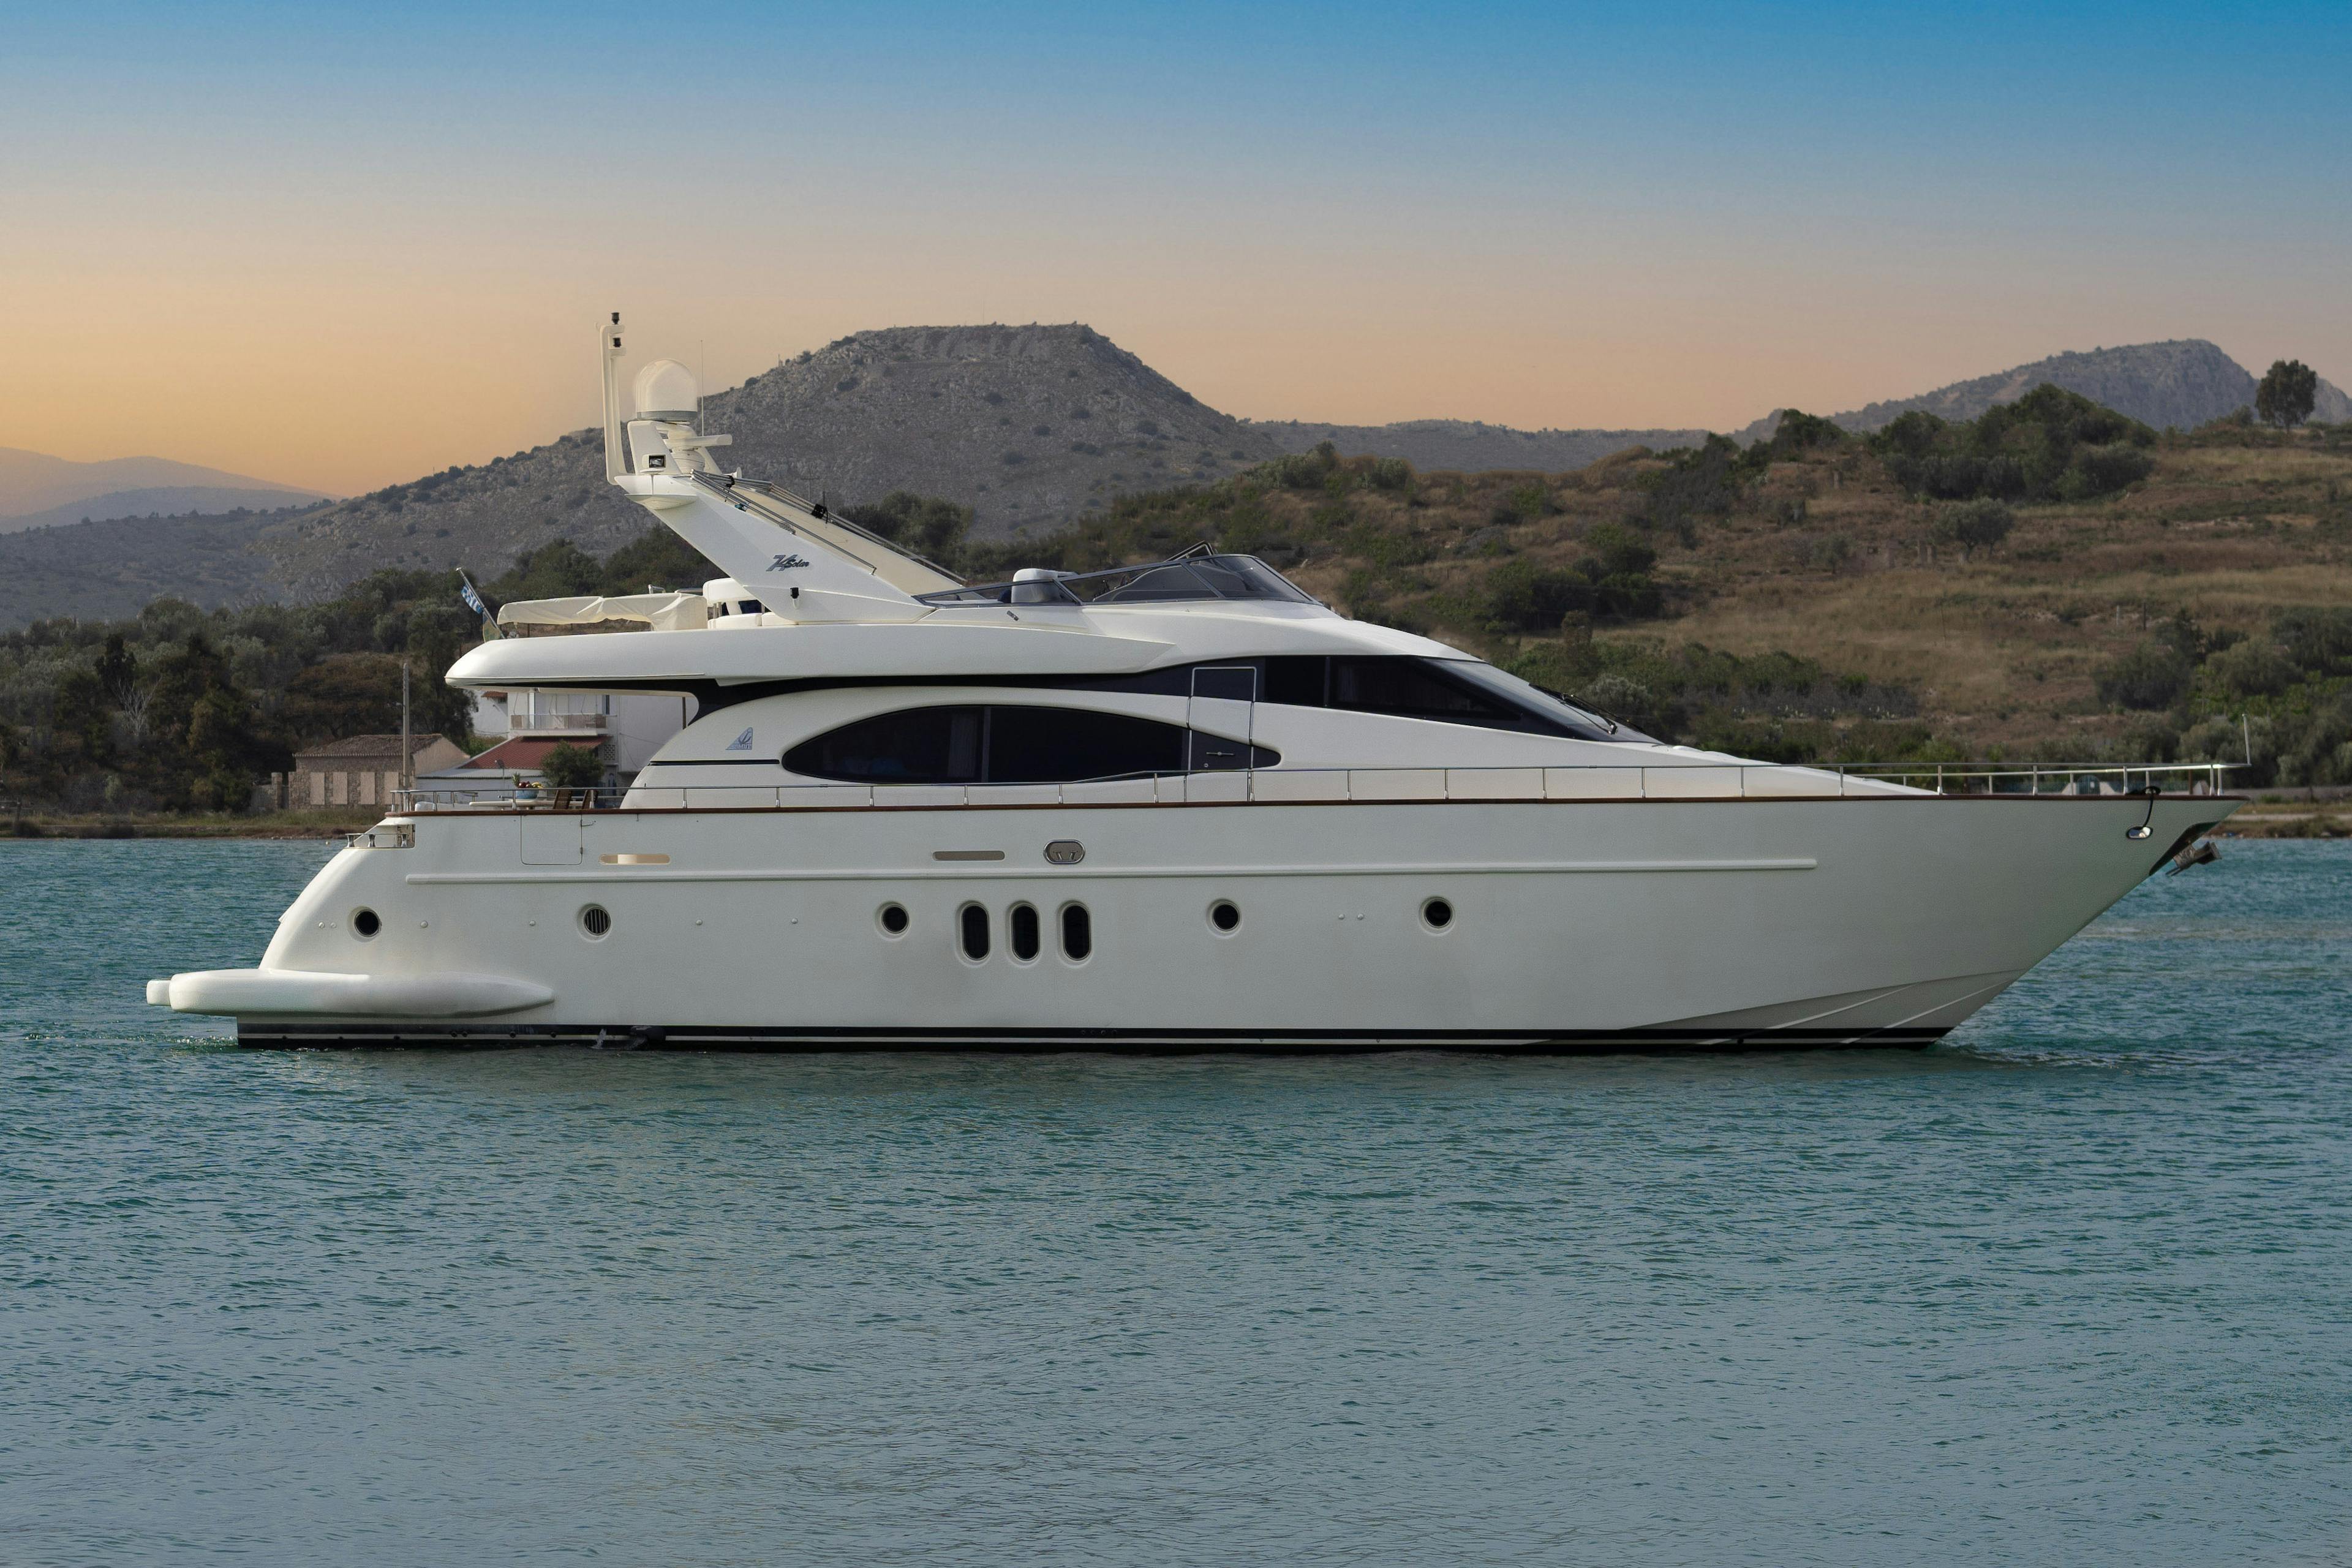 Book Azimut 74 Fly - 3 + 1 cab. Motor yacht for bareboat charter in Athens, Agios Kosmas marina, Athens area/Saronic/Peloponese, Greece with TripYacht!, picture 2